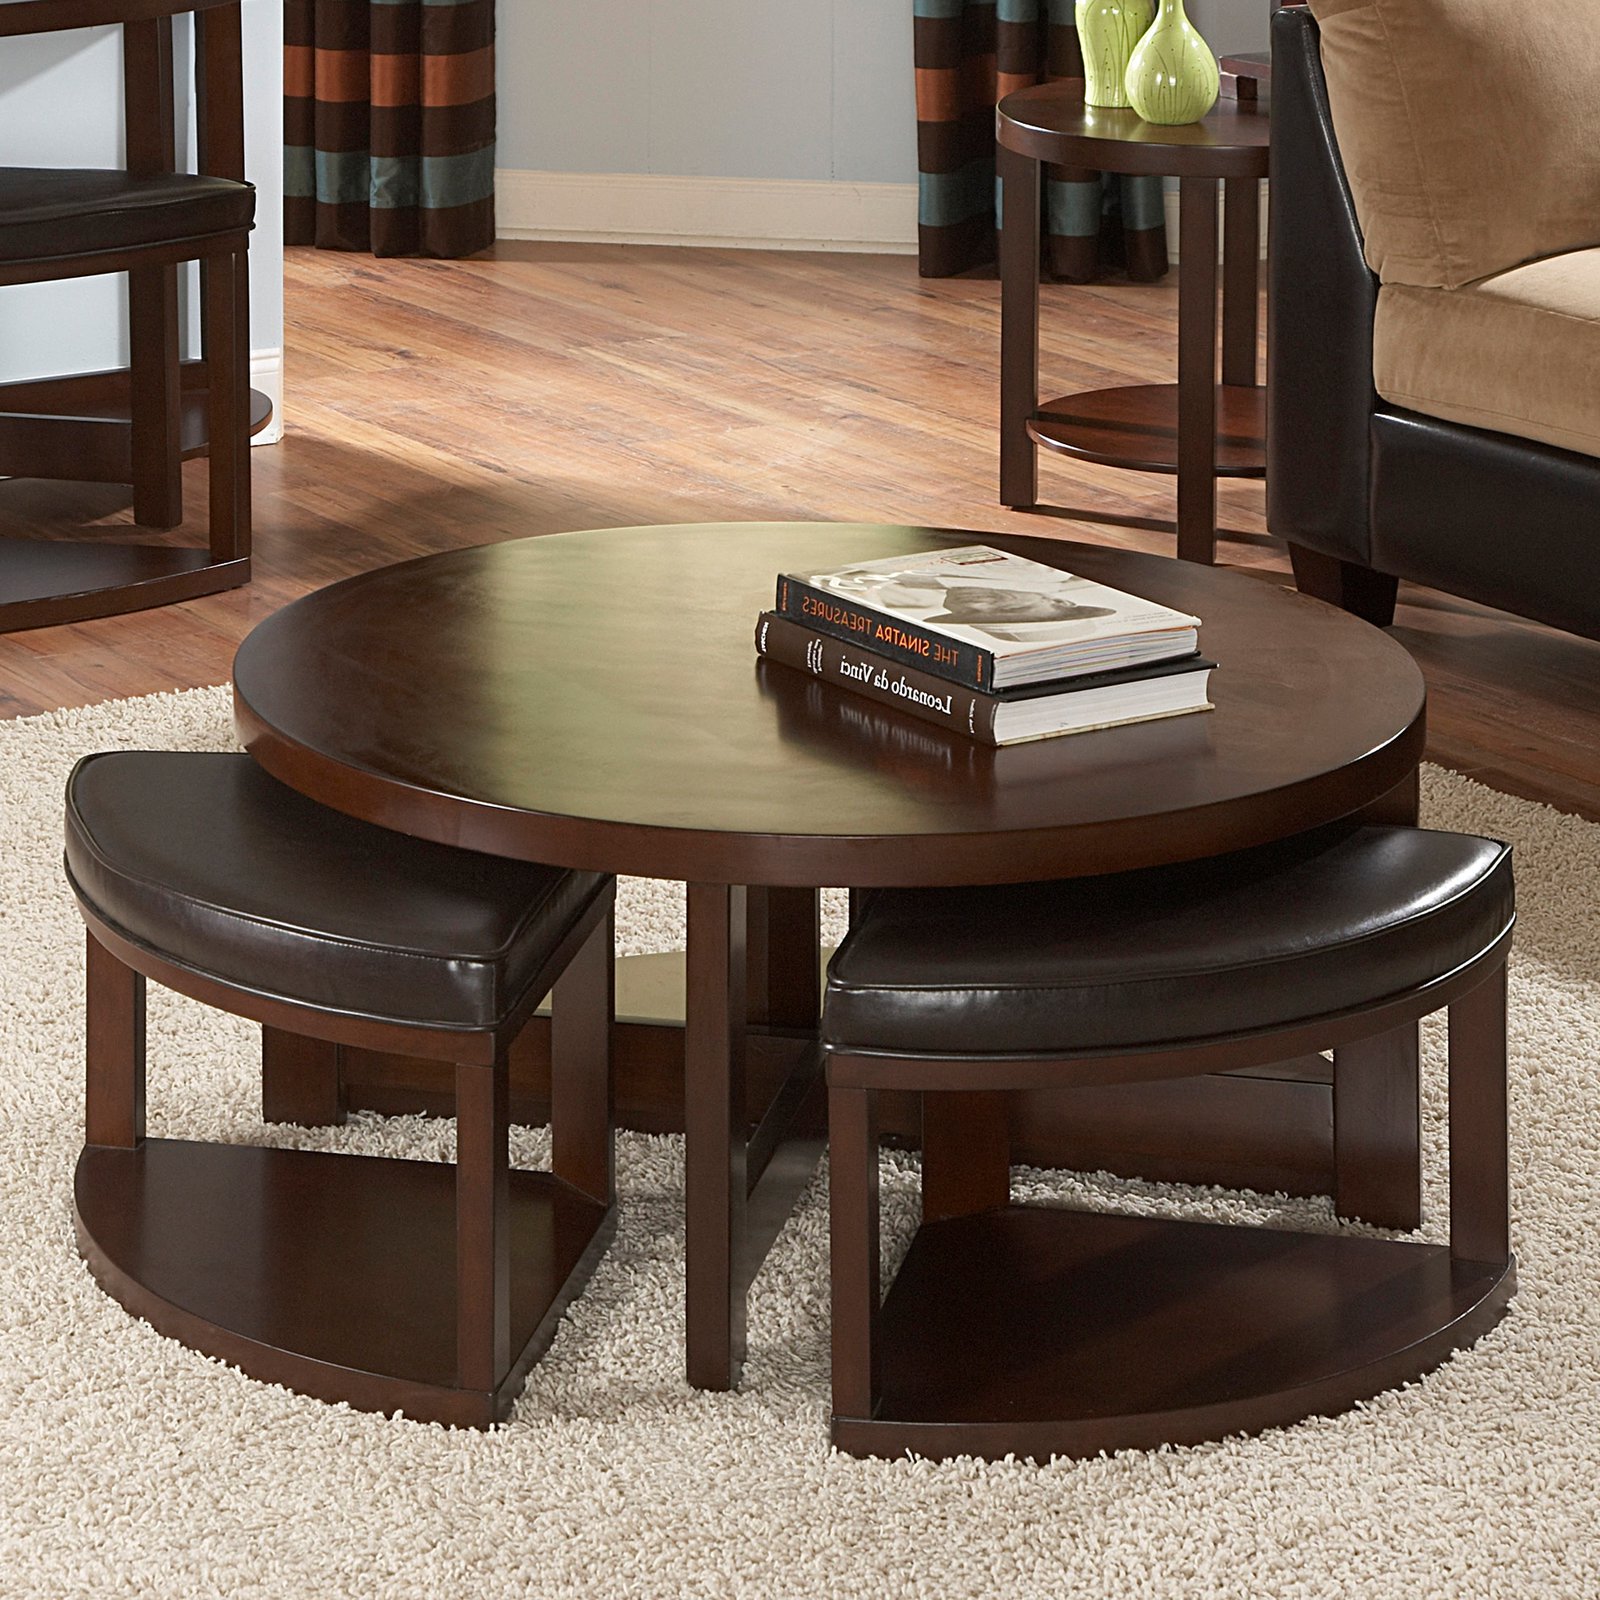 Coffee table with seating